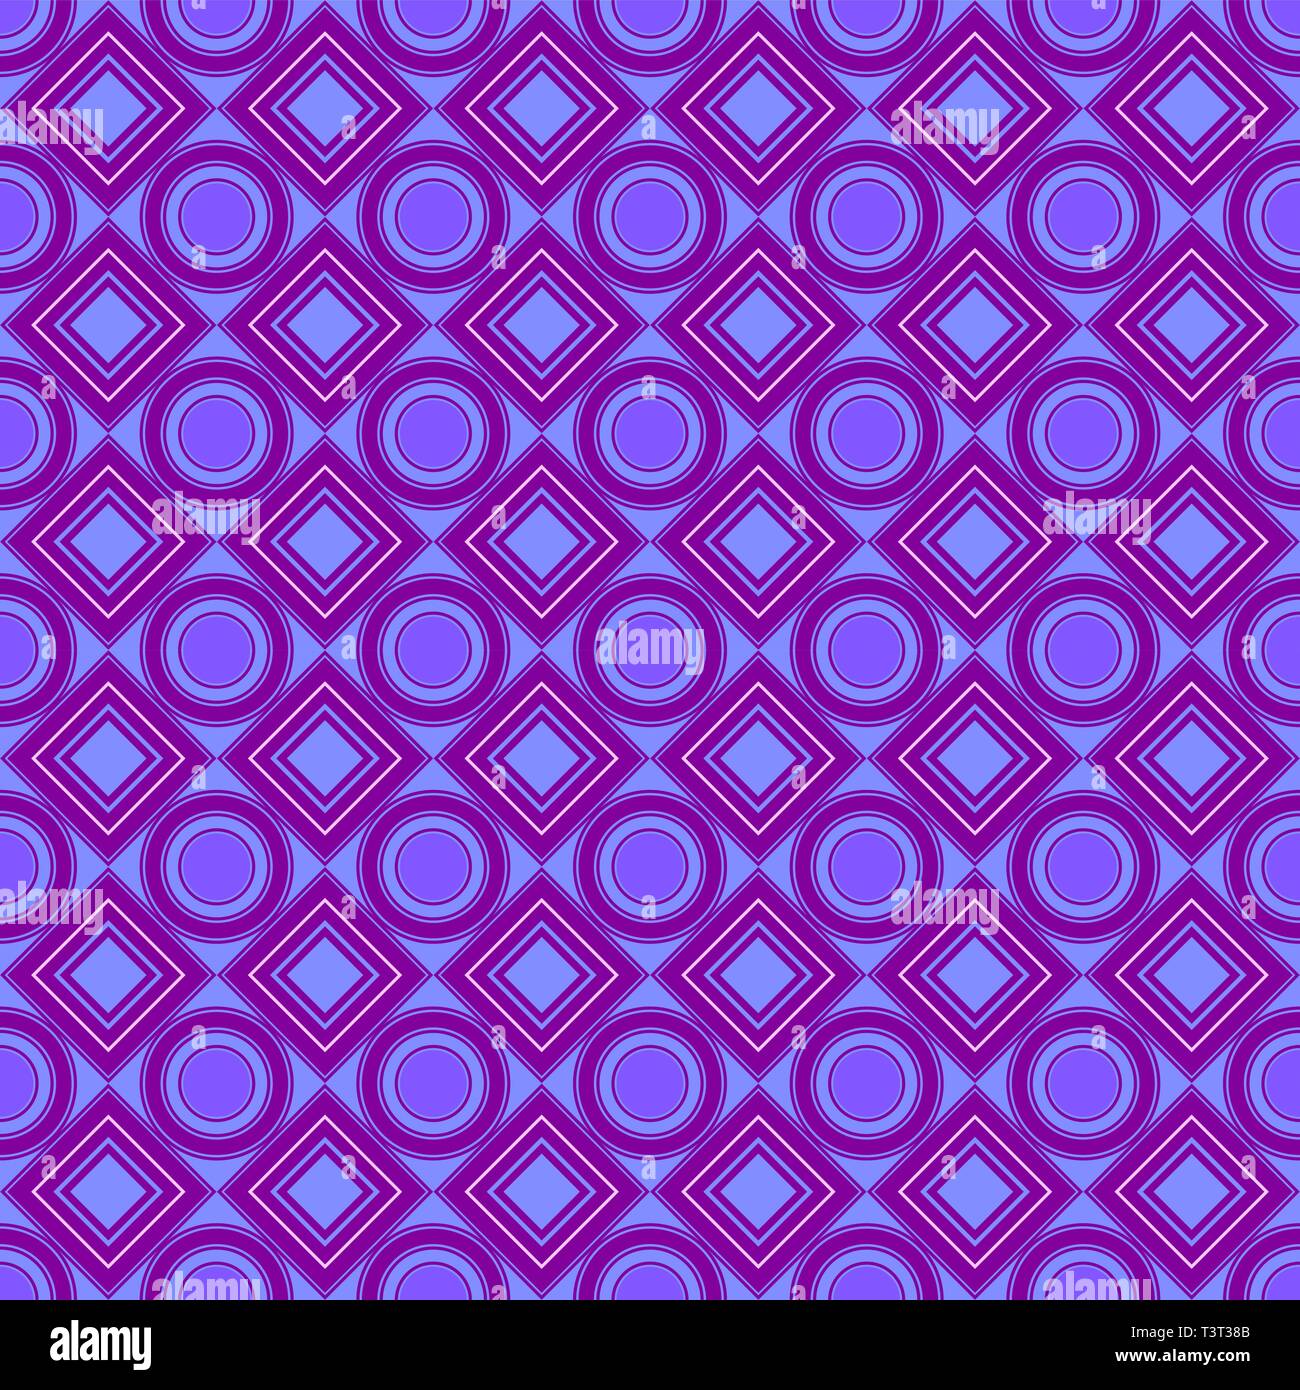 Vector seamless pattern. Purple, rhombus, square, circle, textiles. Modern stylish texture. Repeating geometric figures. Abstract background. Stock Vector